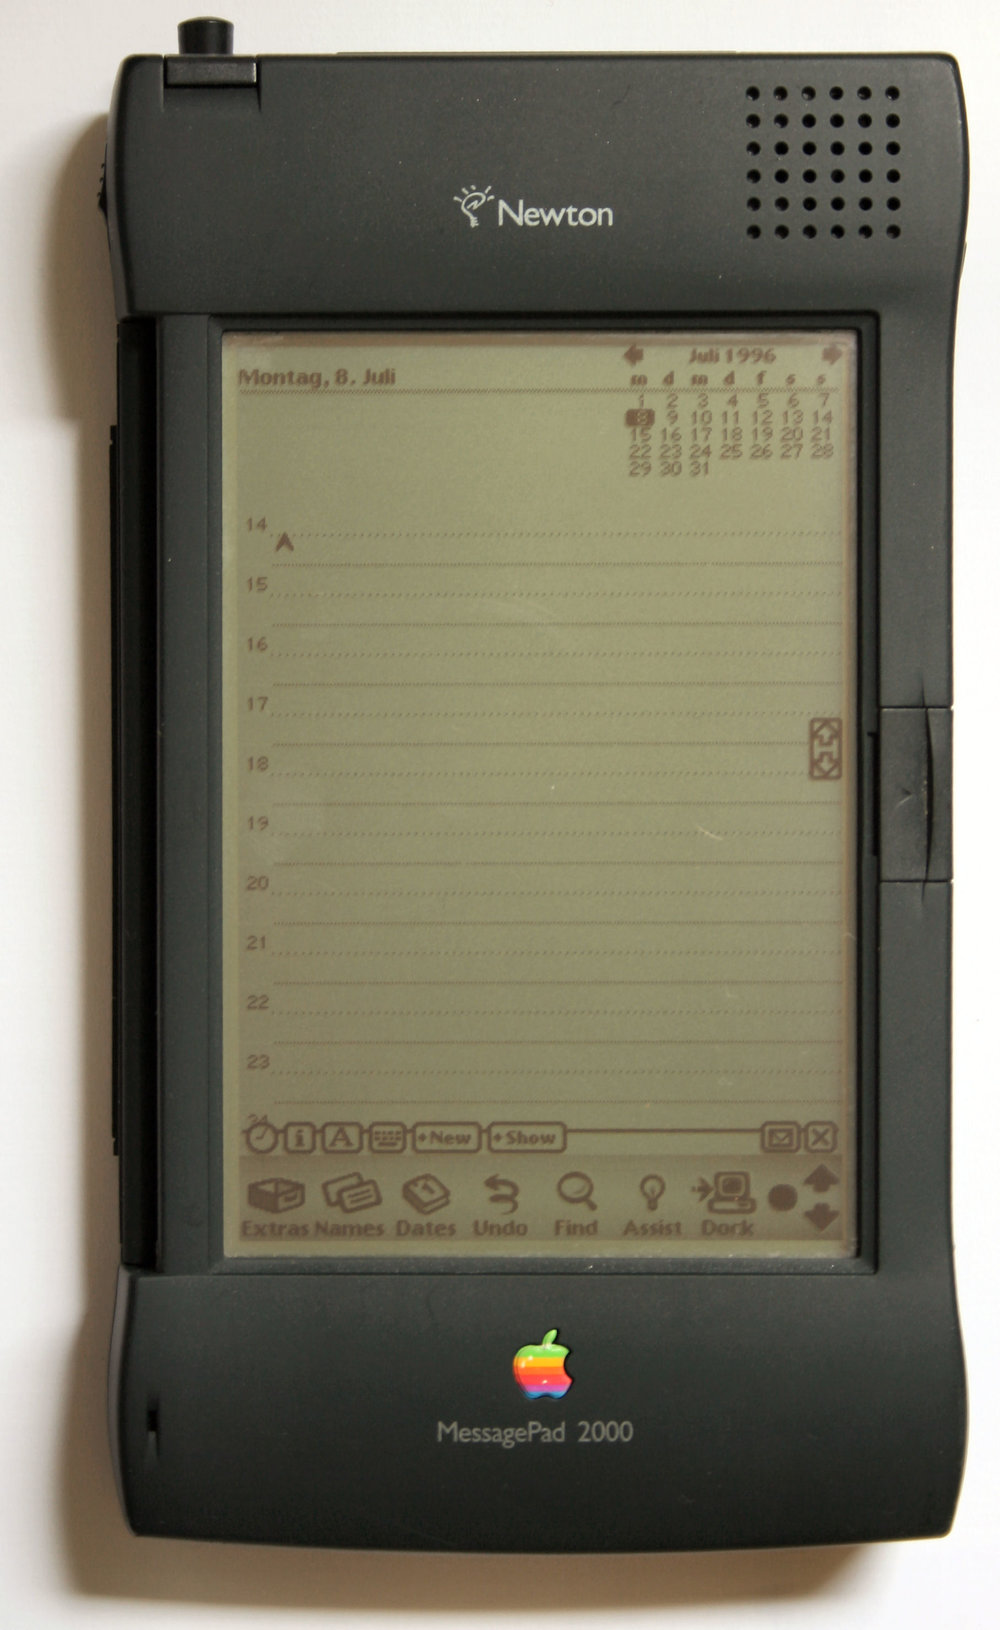 One of apples's failures; The Apple newton